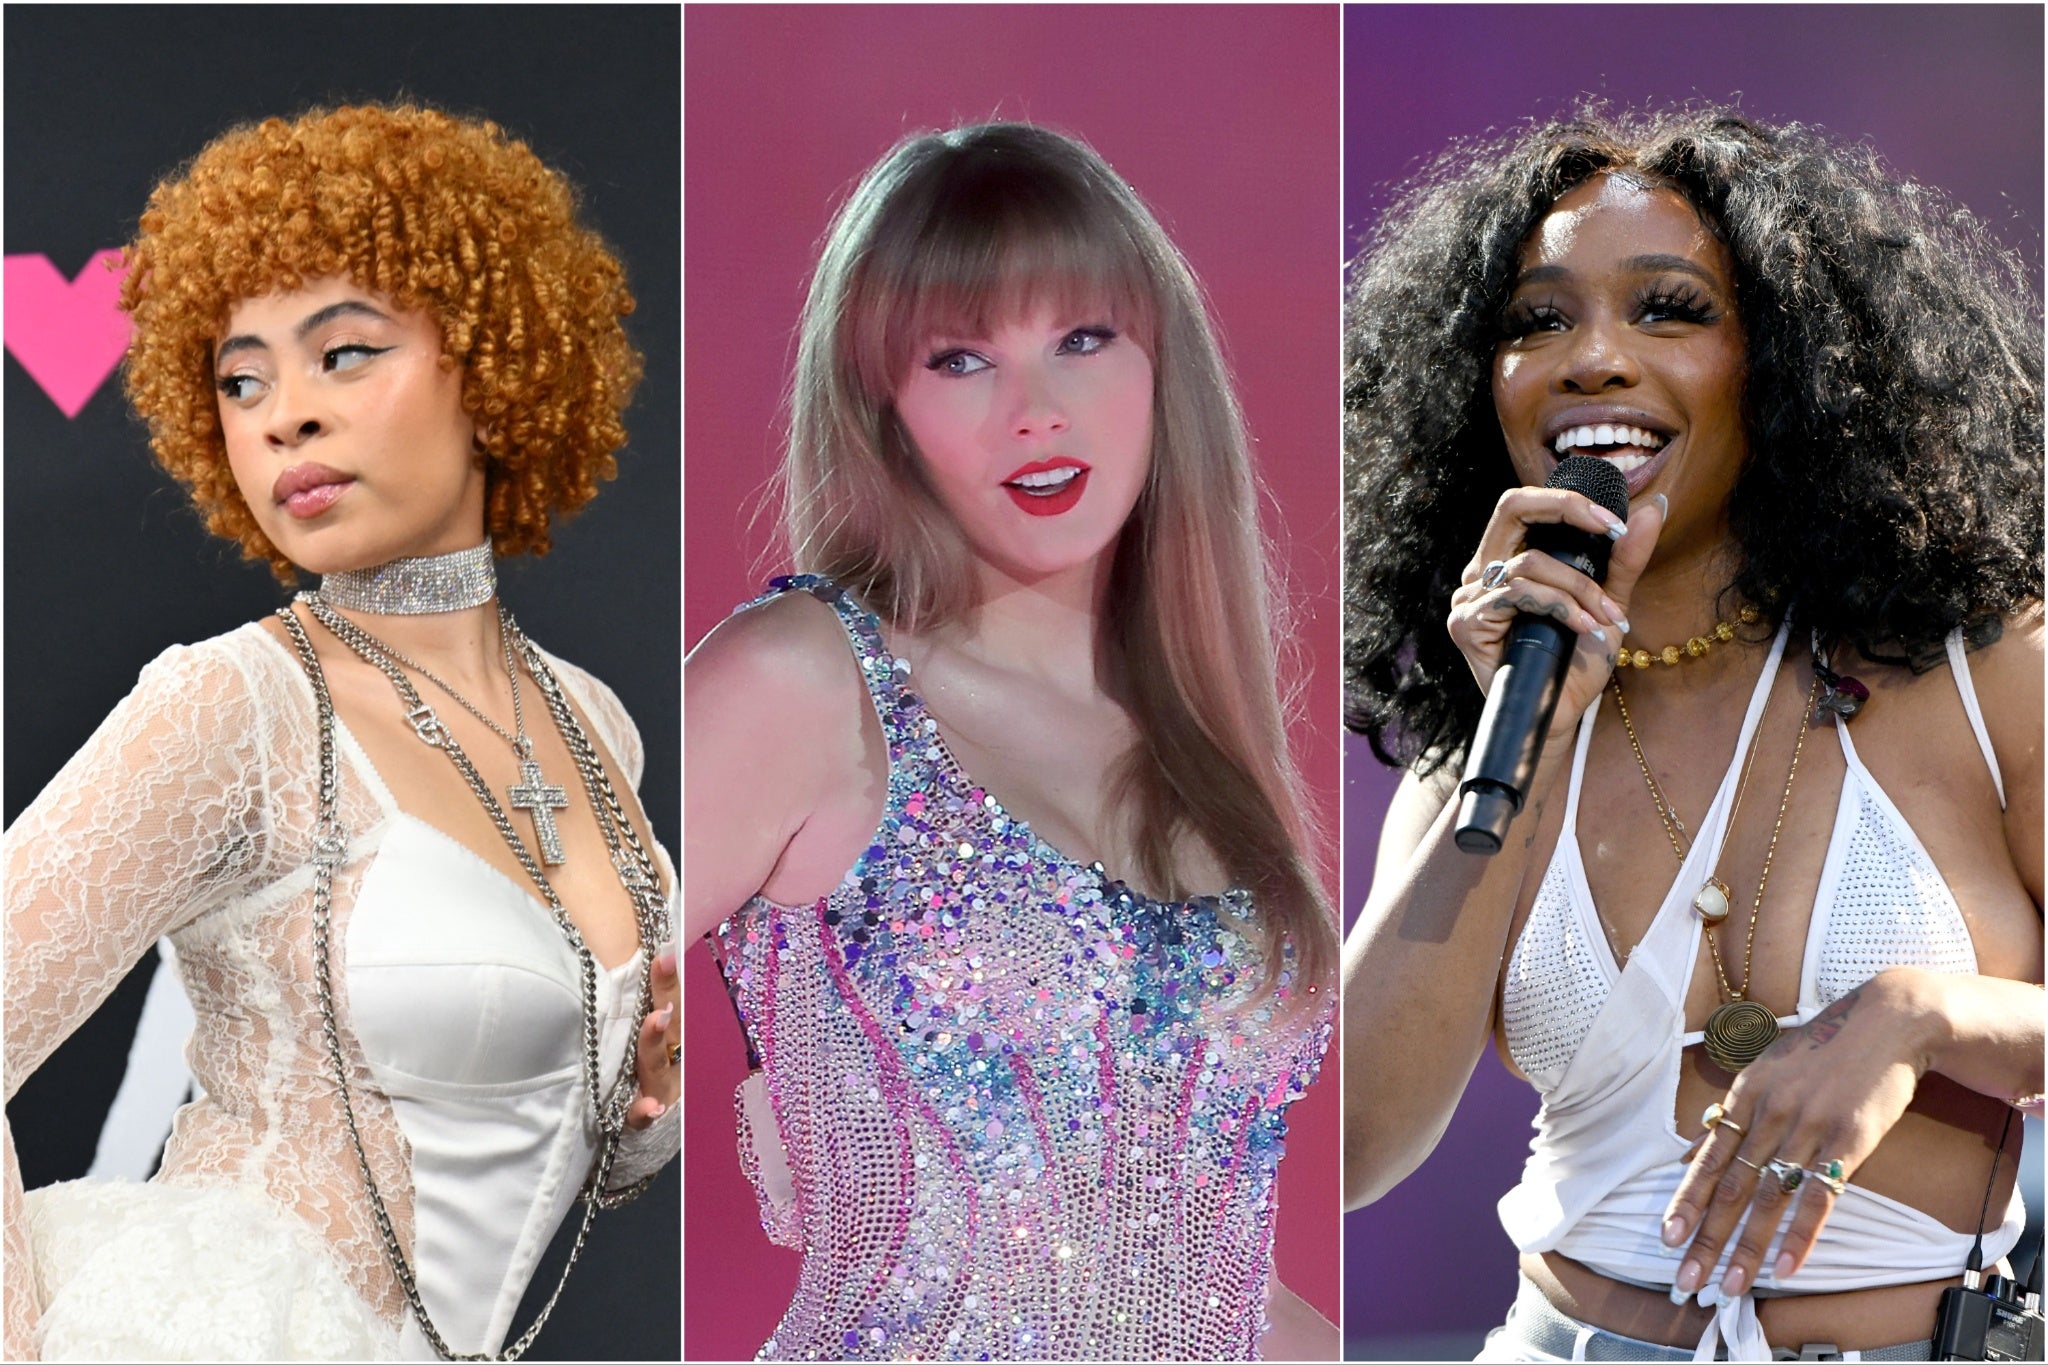 Ice Spice, Taylor Swift and SZA are among notable nominees at the 66th Grammy Awards